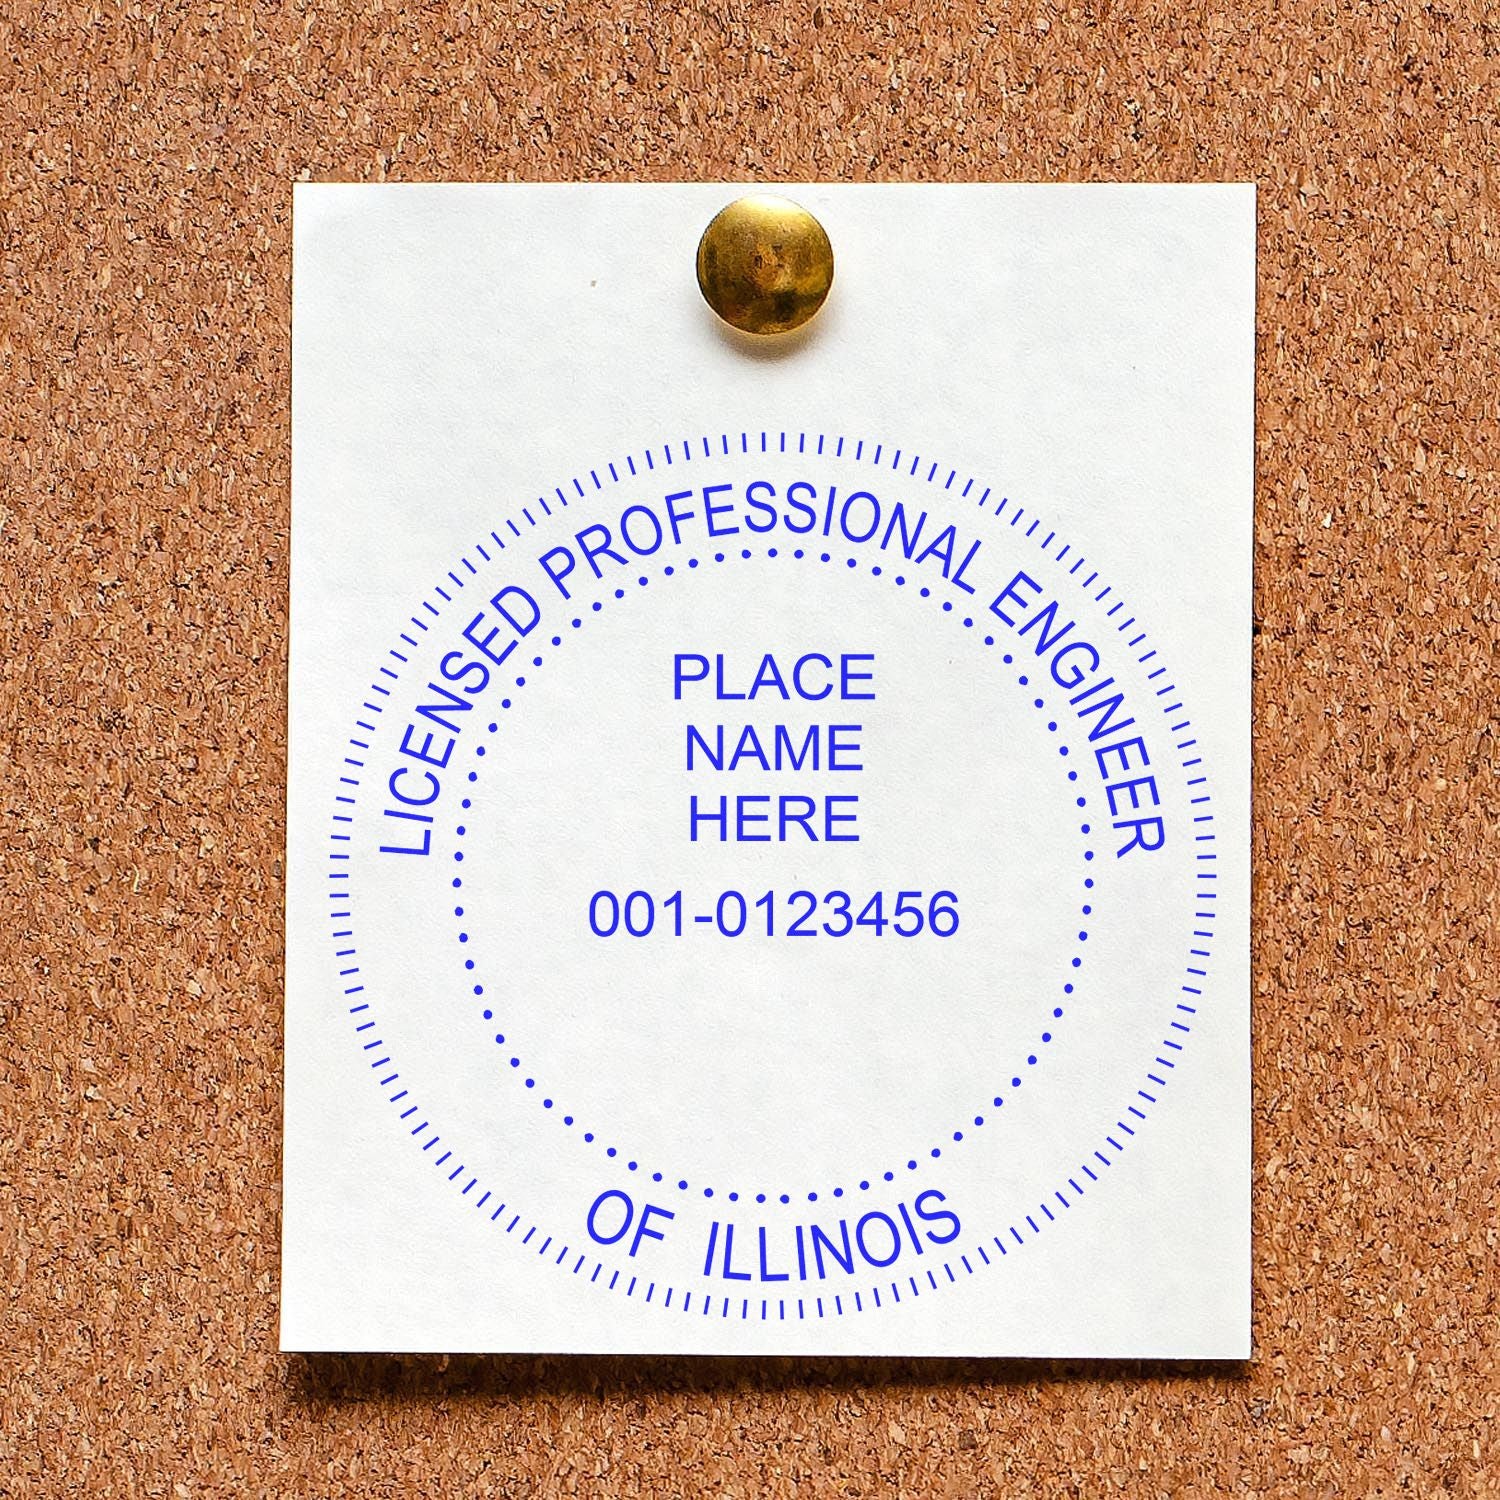 The main image for the Premium MaxLight Pre-Inked Illinois Engineering Stamp depicting a sample of the imprint and electronic files